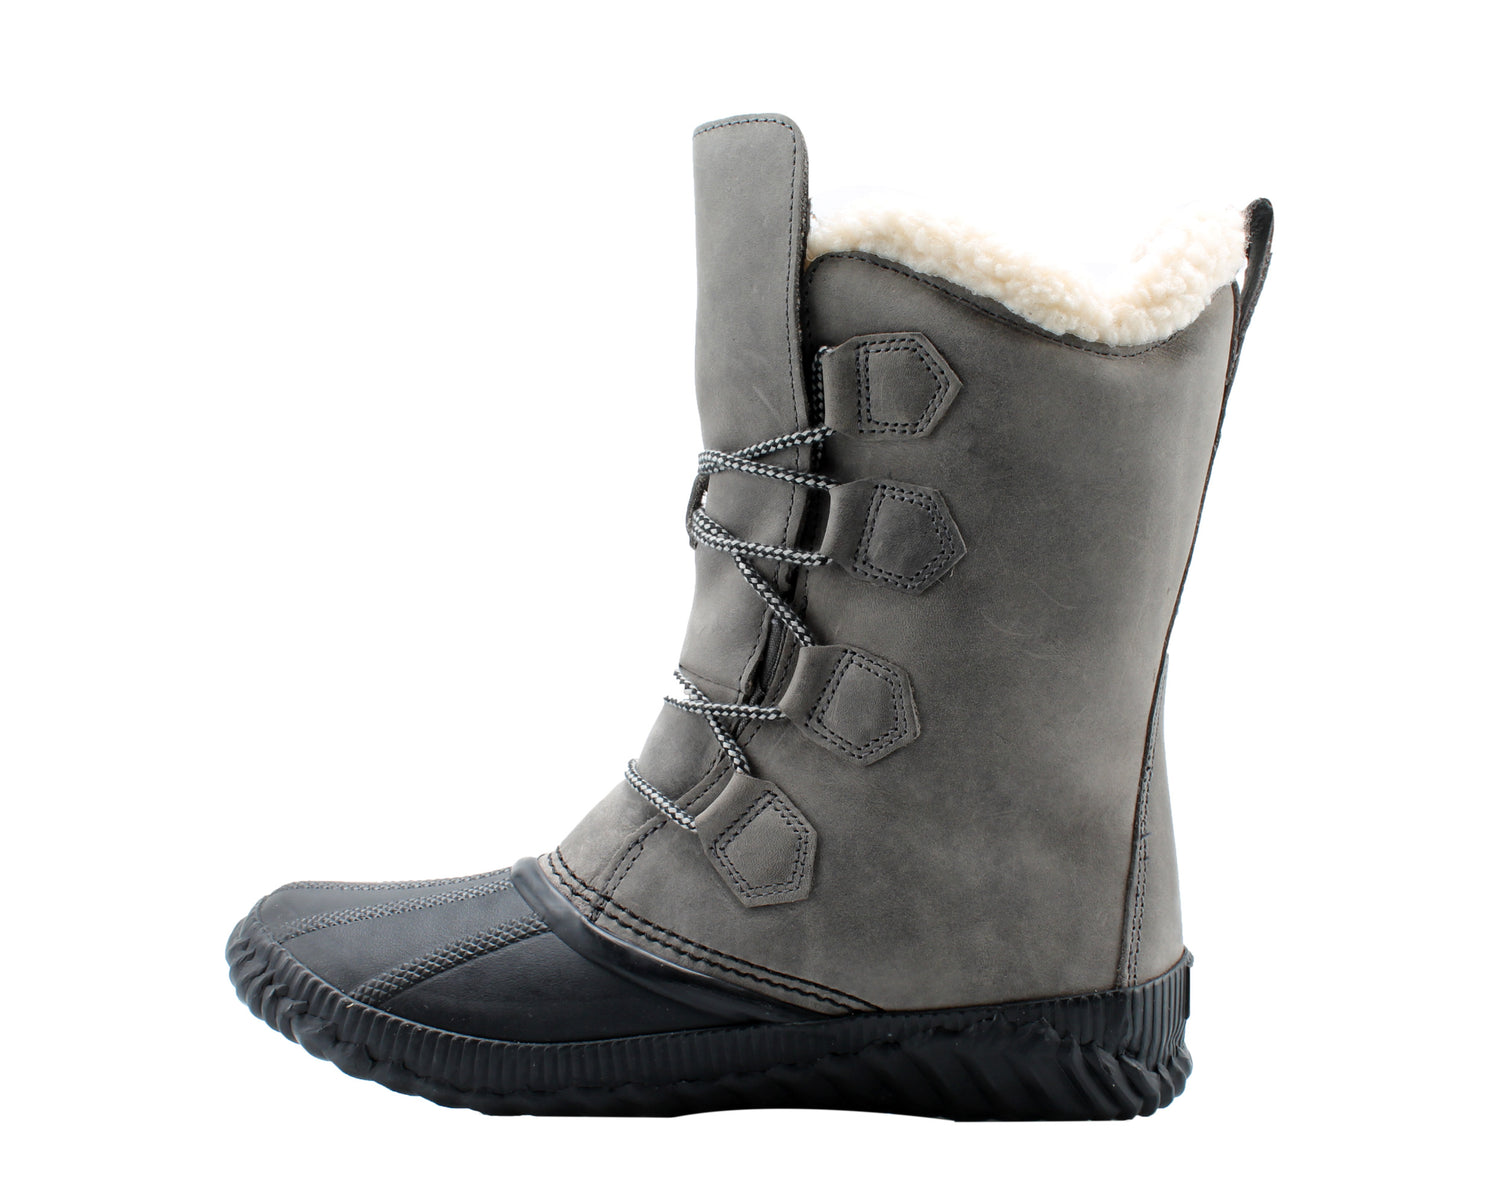 Sorel Out 'N About Plus Tall Women's Boots